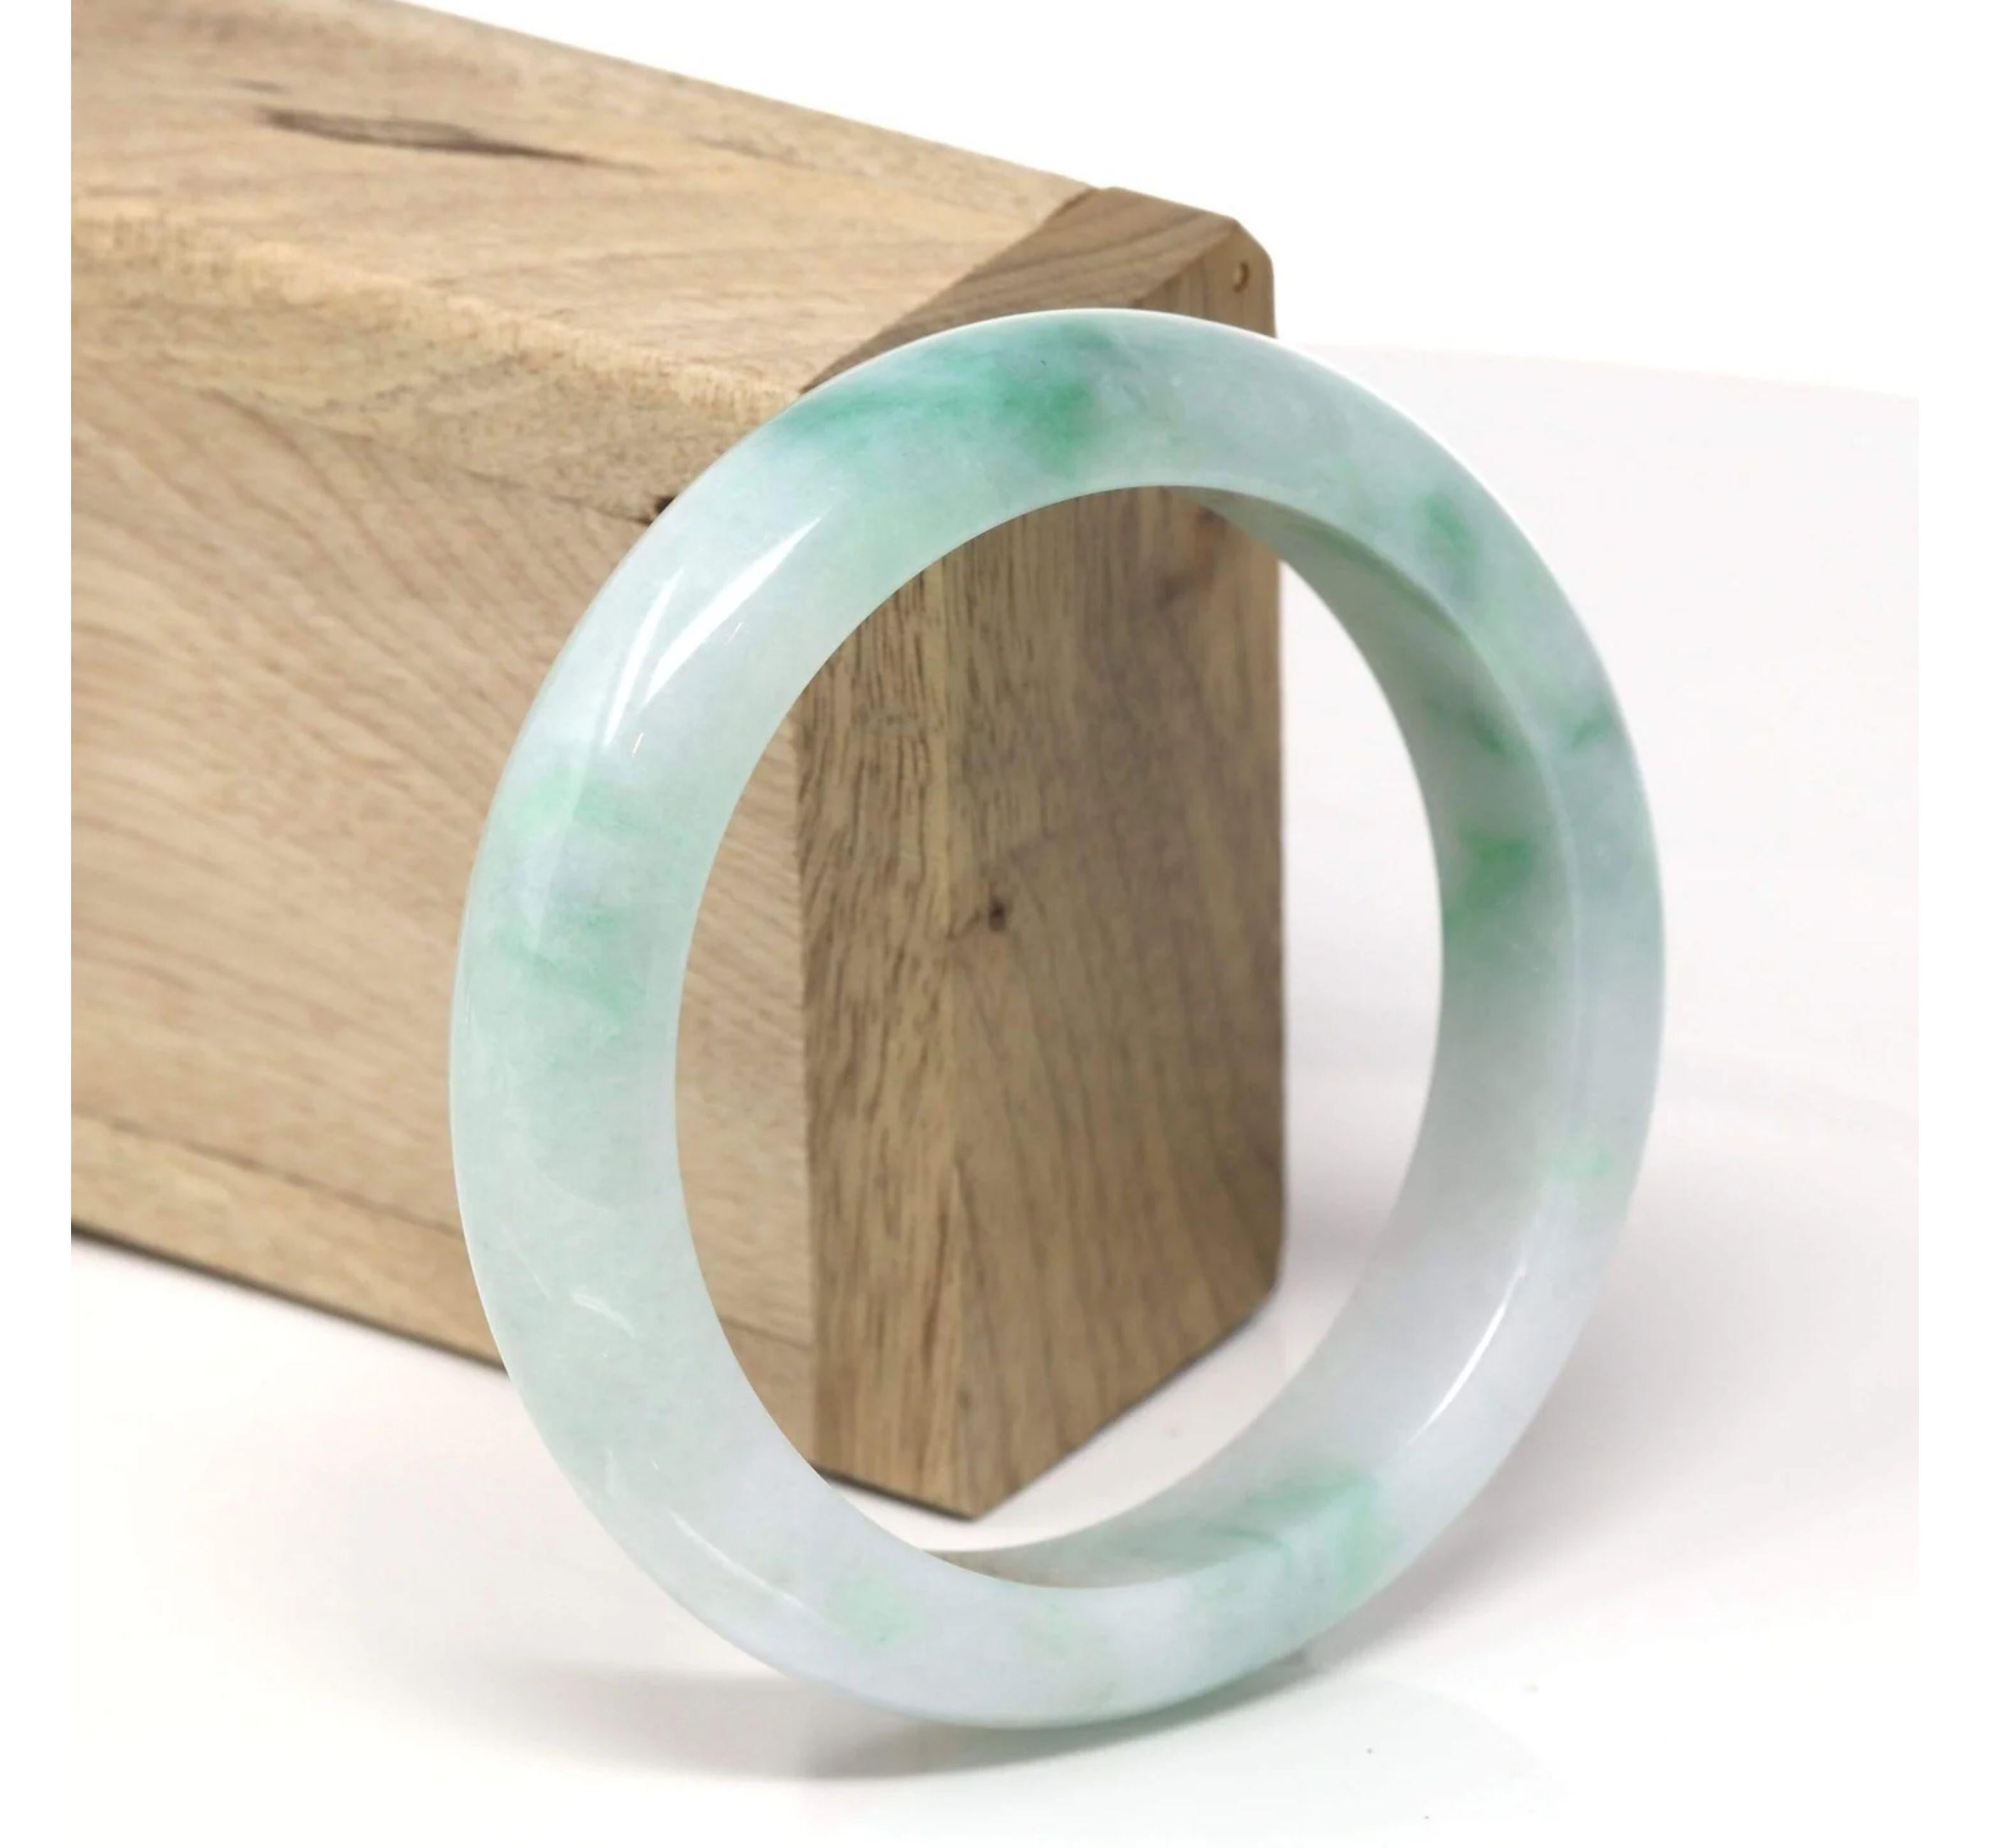 * DETAILS--- This natural Burmese Jadeite Jade bangle is a beautiful bright green all throughout with the color a little more vibrant on one side and beautiful patterns of green as seen in the pictures. The texture is very even throughout the